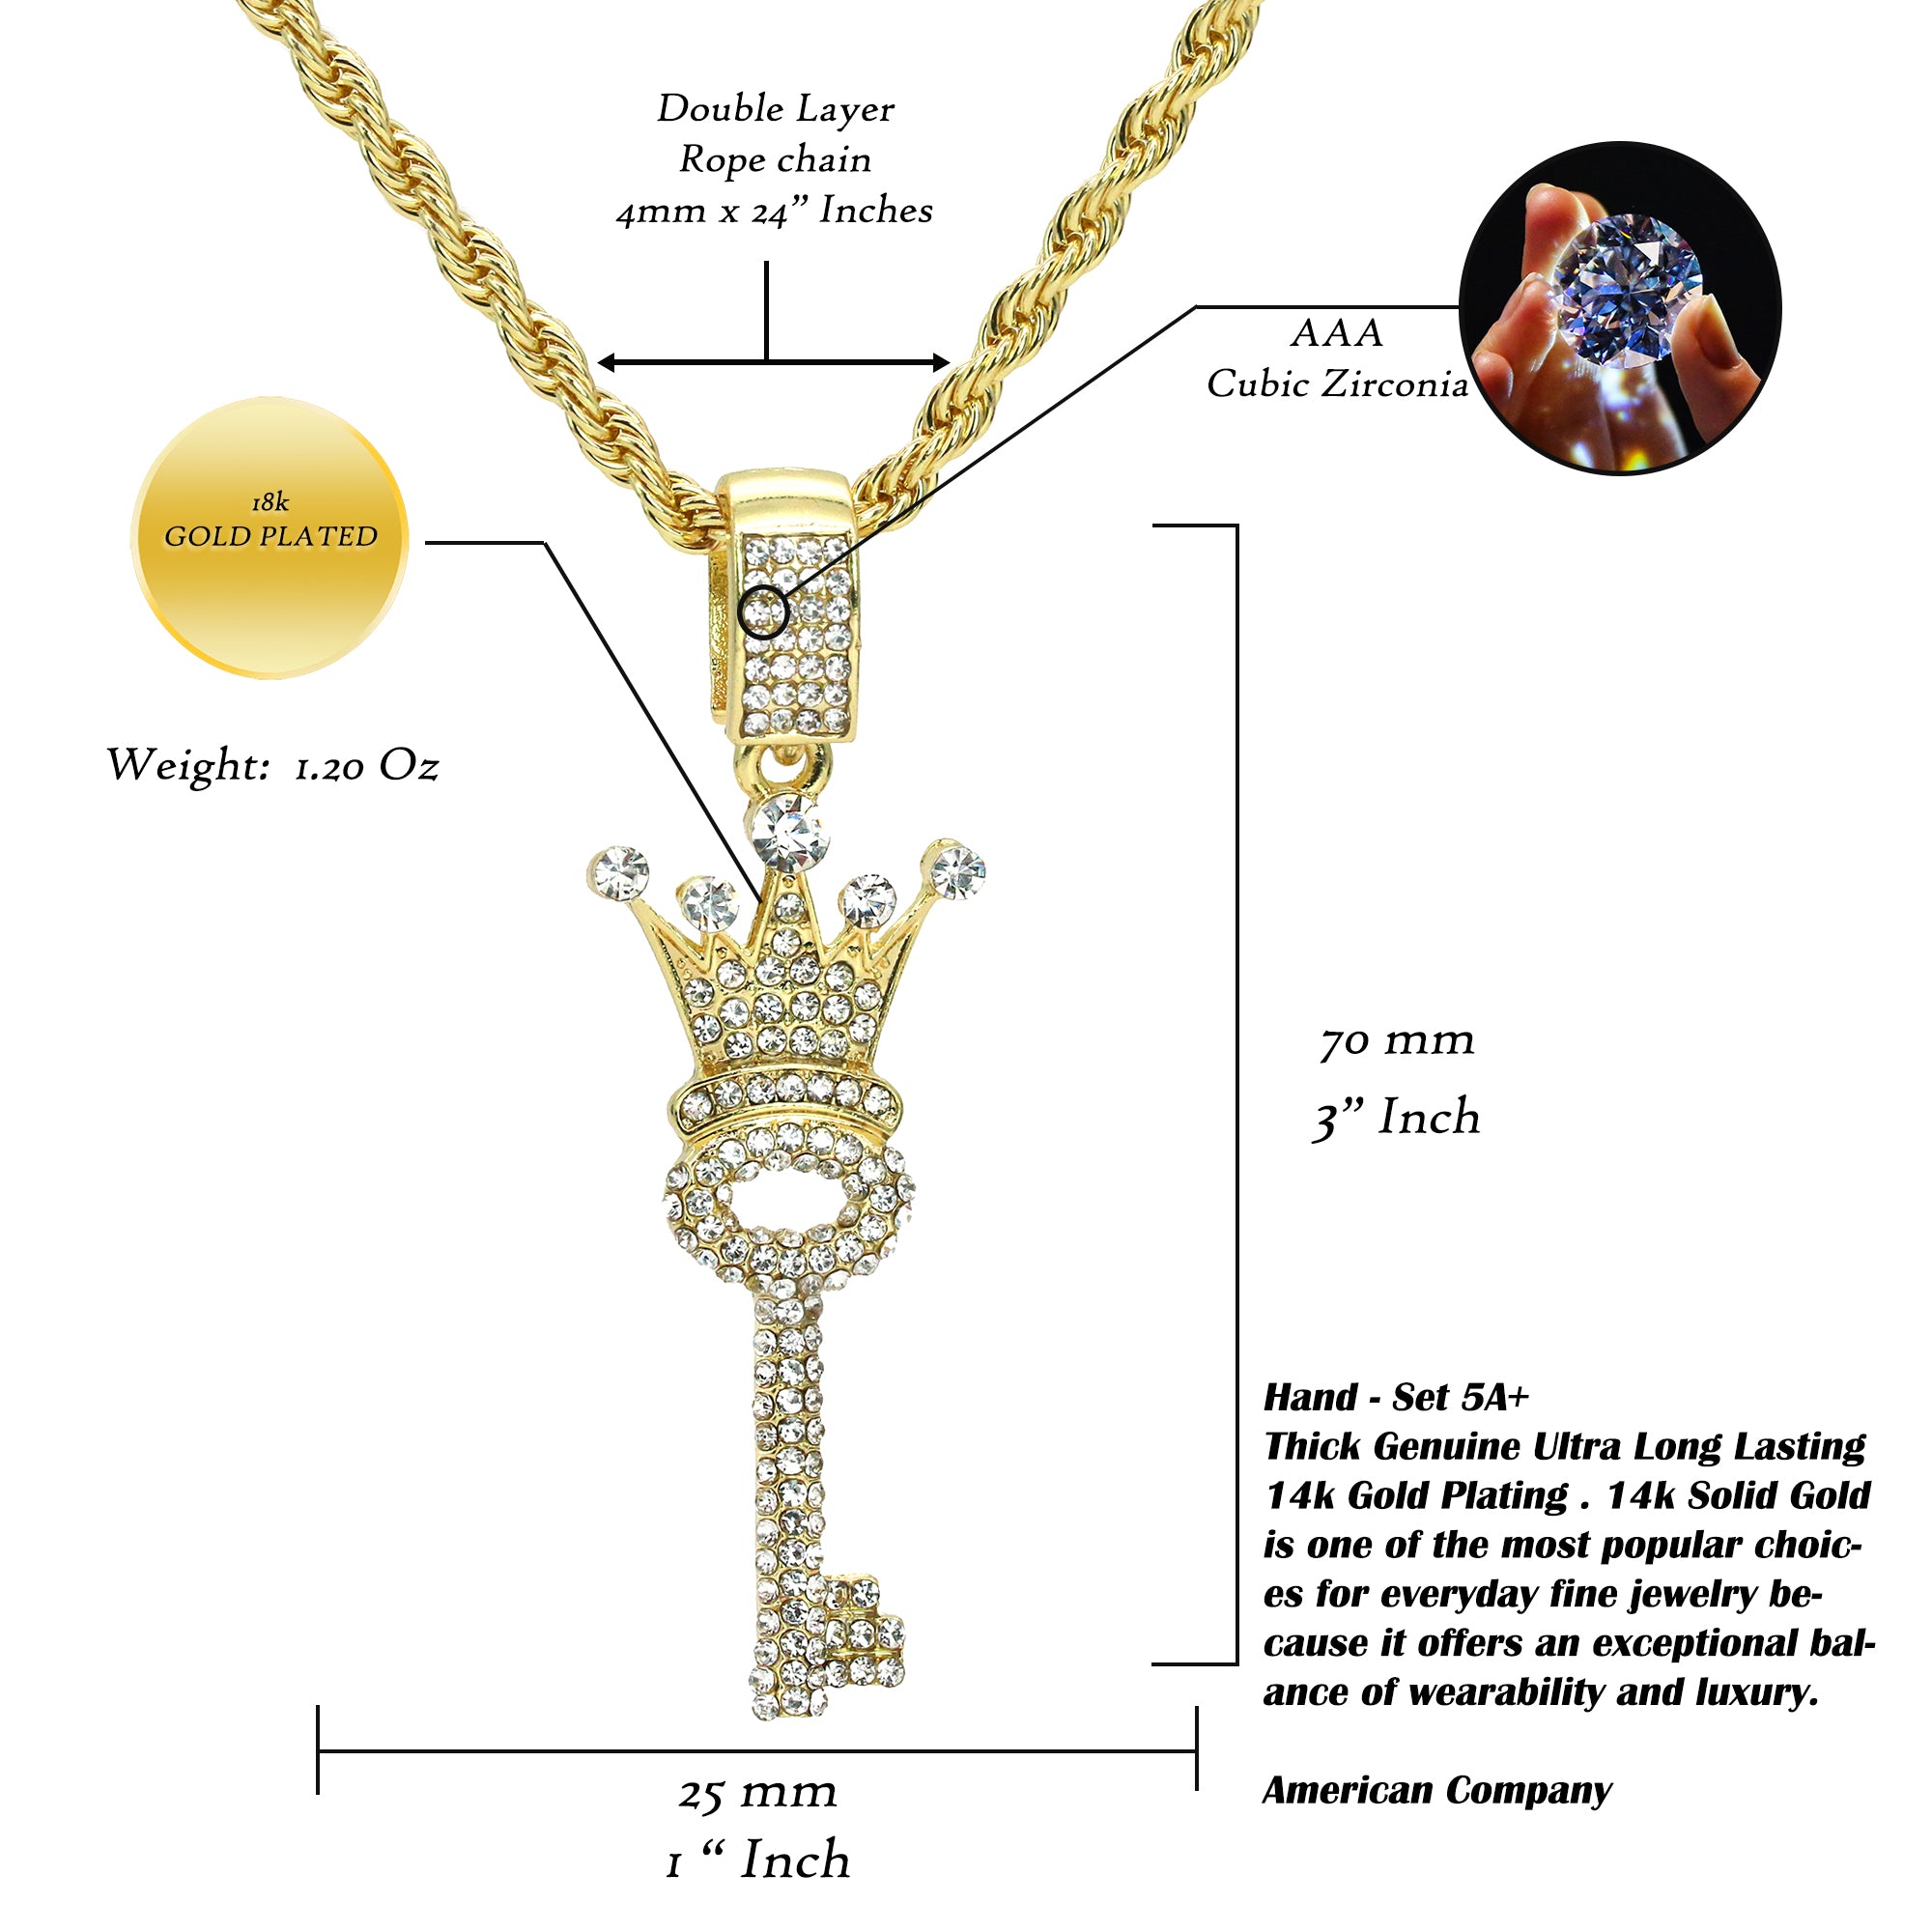 OG Crowned Key Pendant Rope Necklace Chain Men's Hip Hop 18k Cz Jewelry